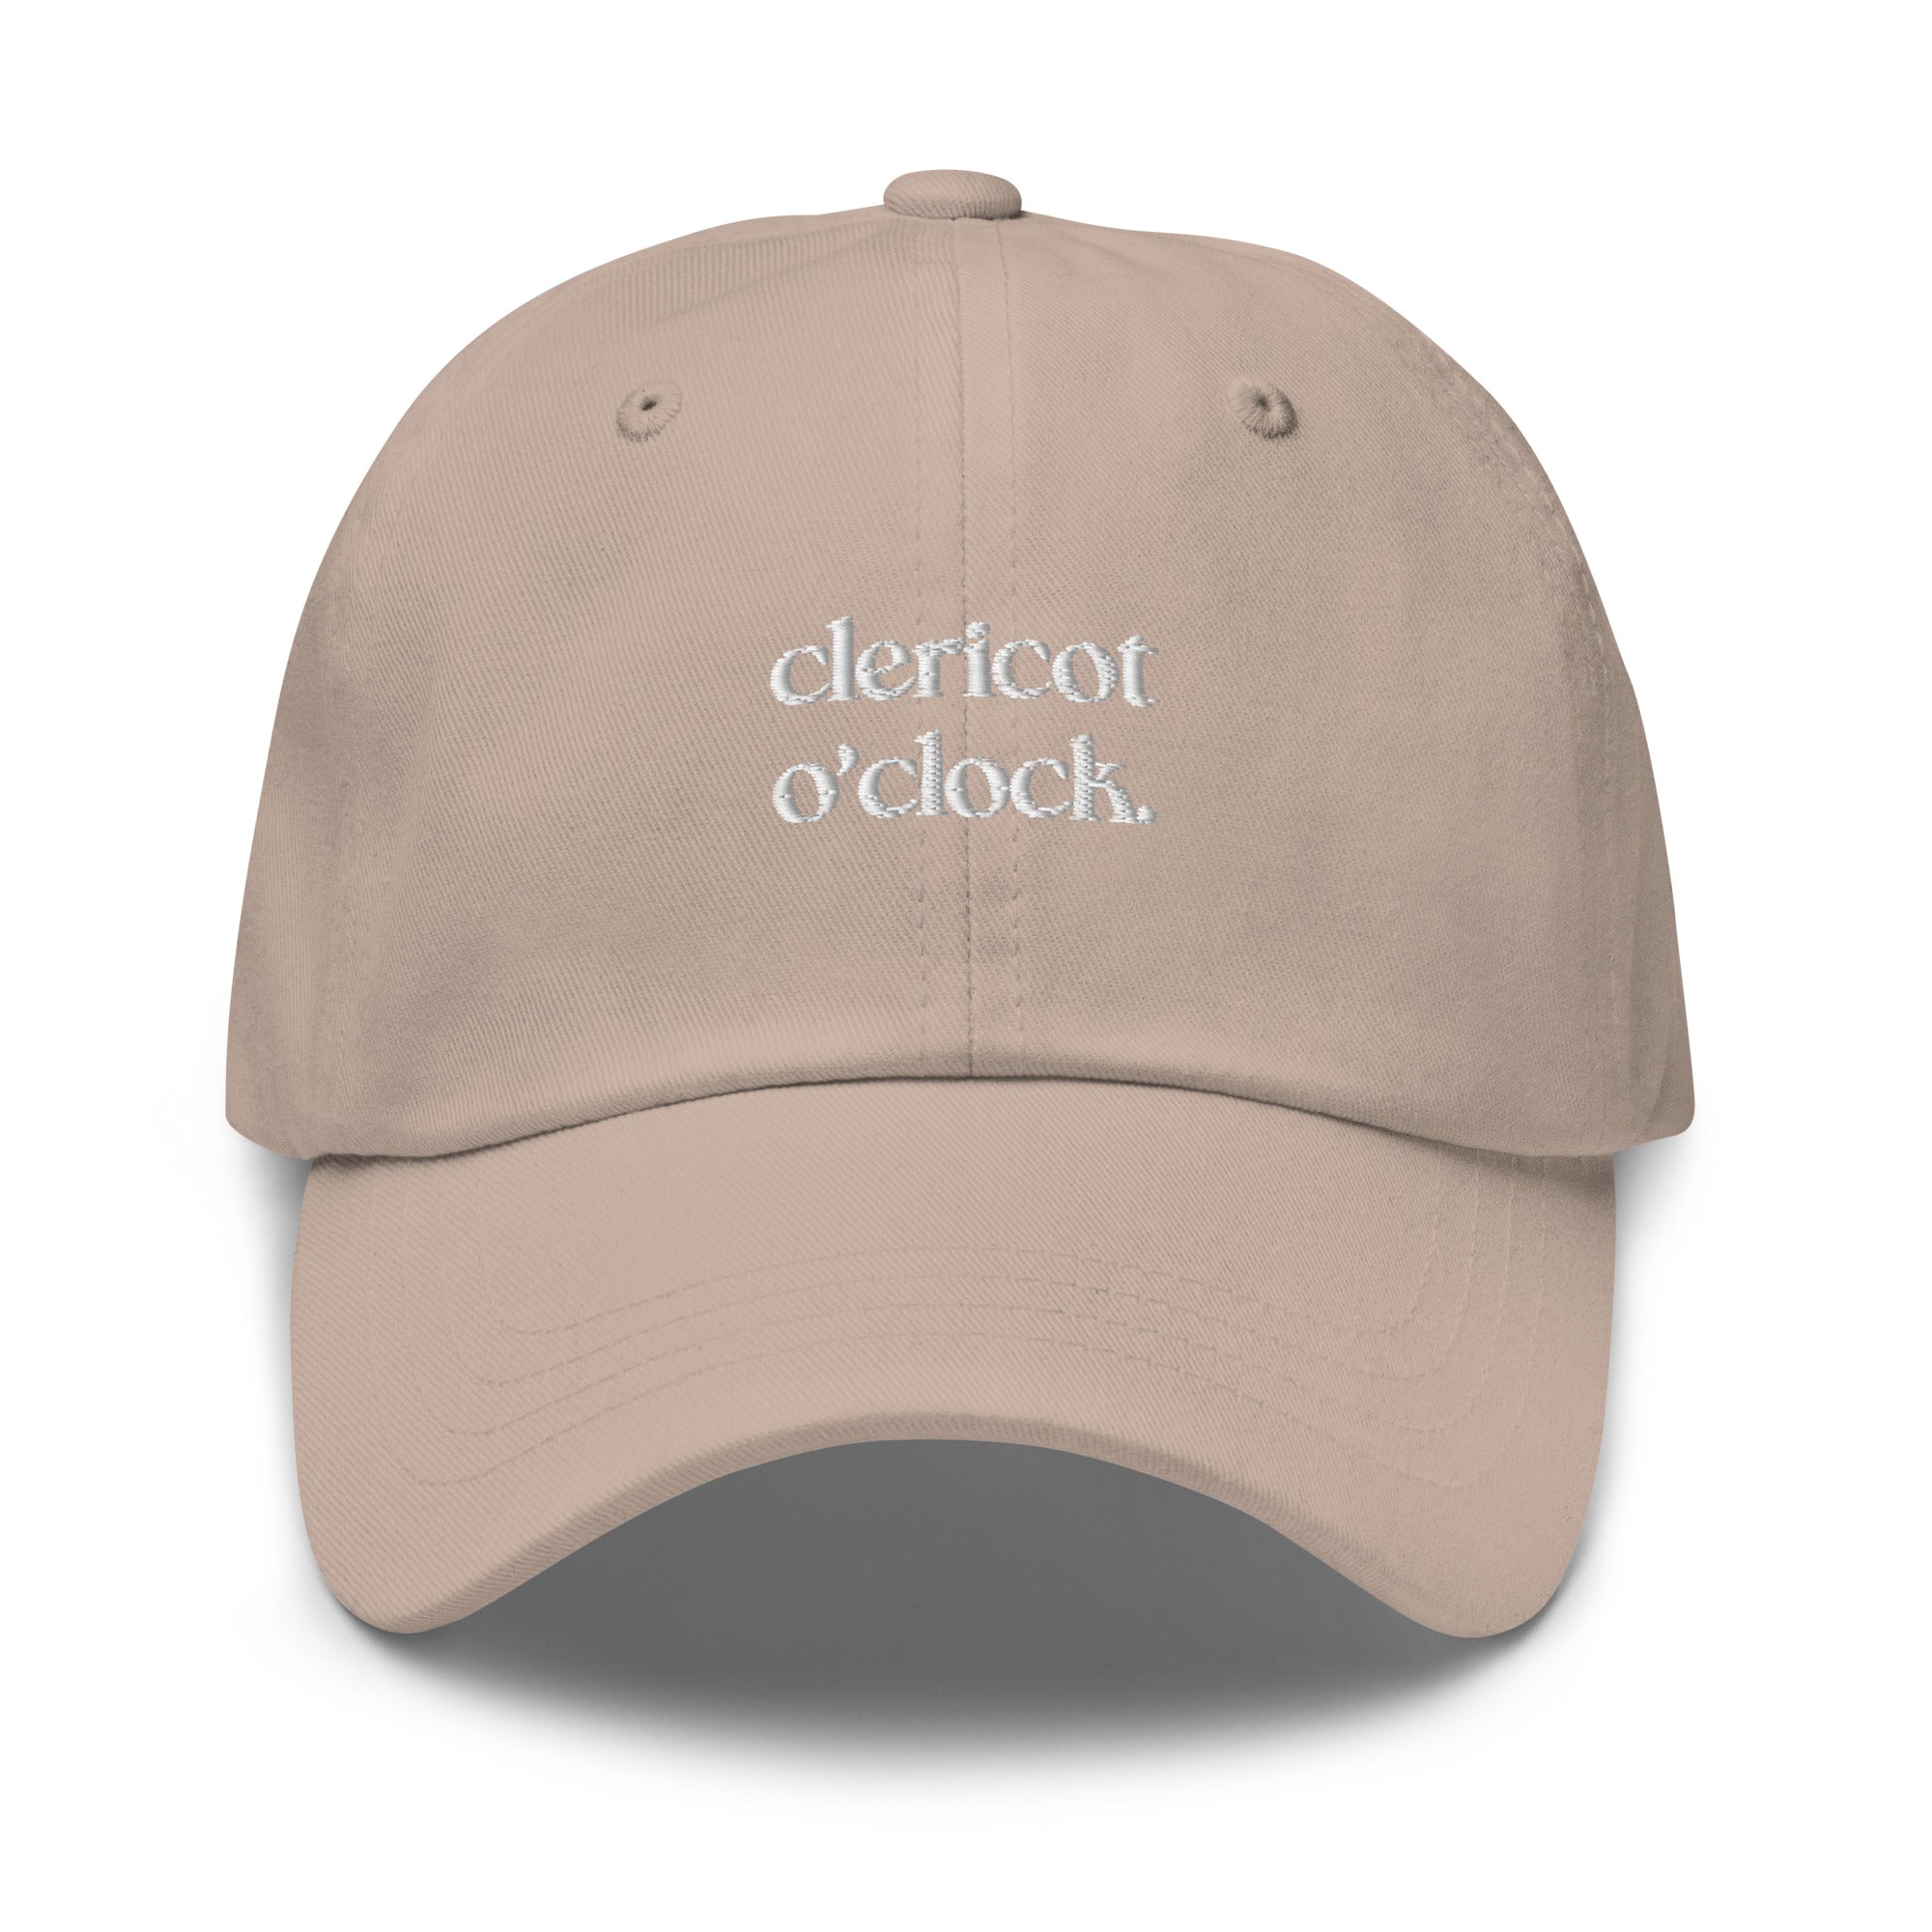 Clericot o'clock - Dad hat